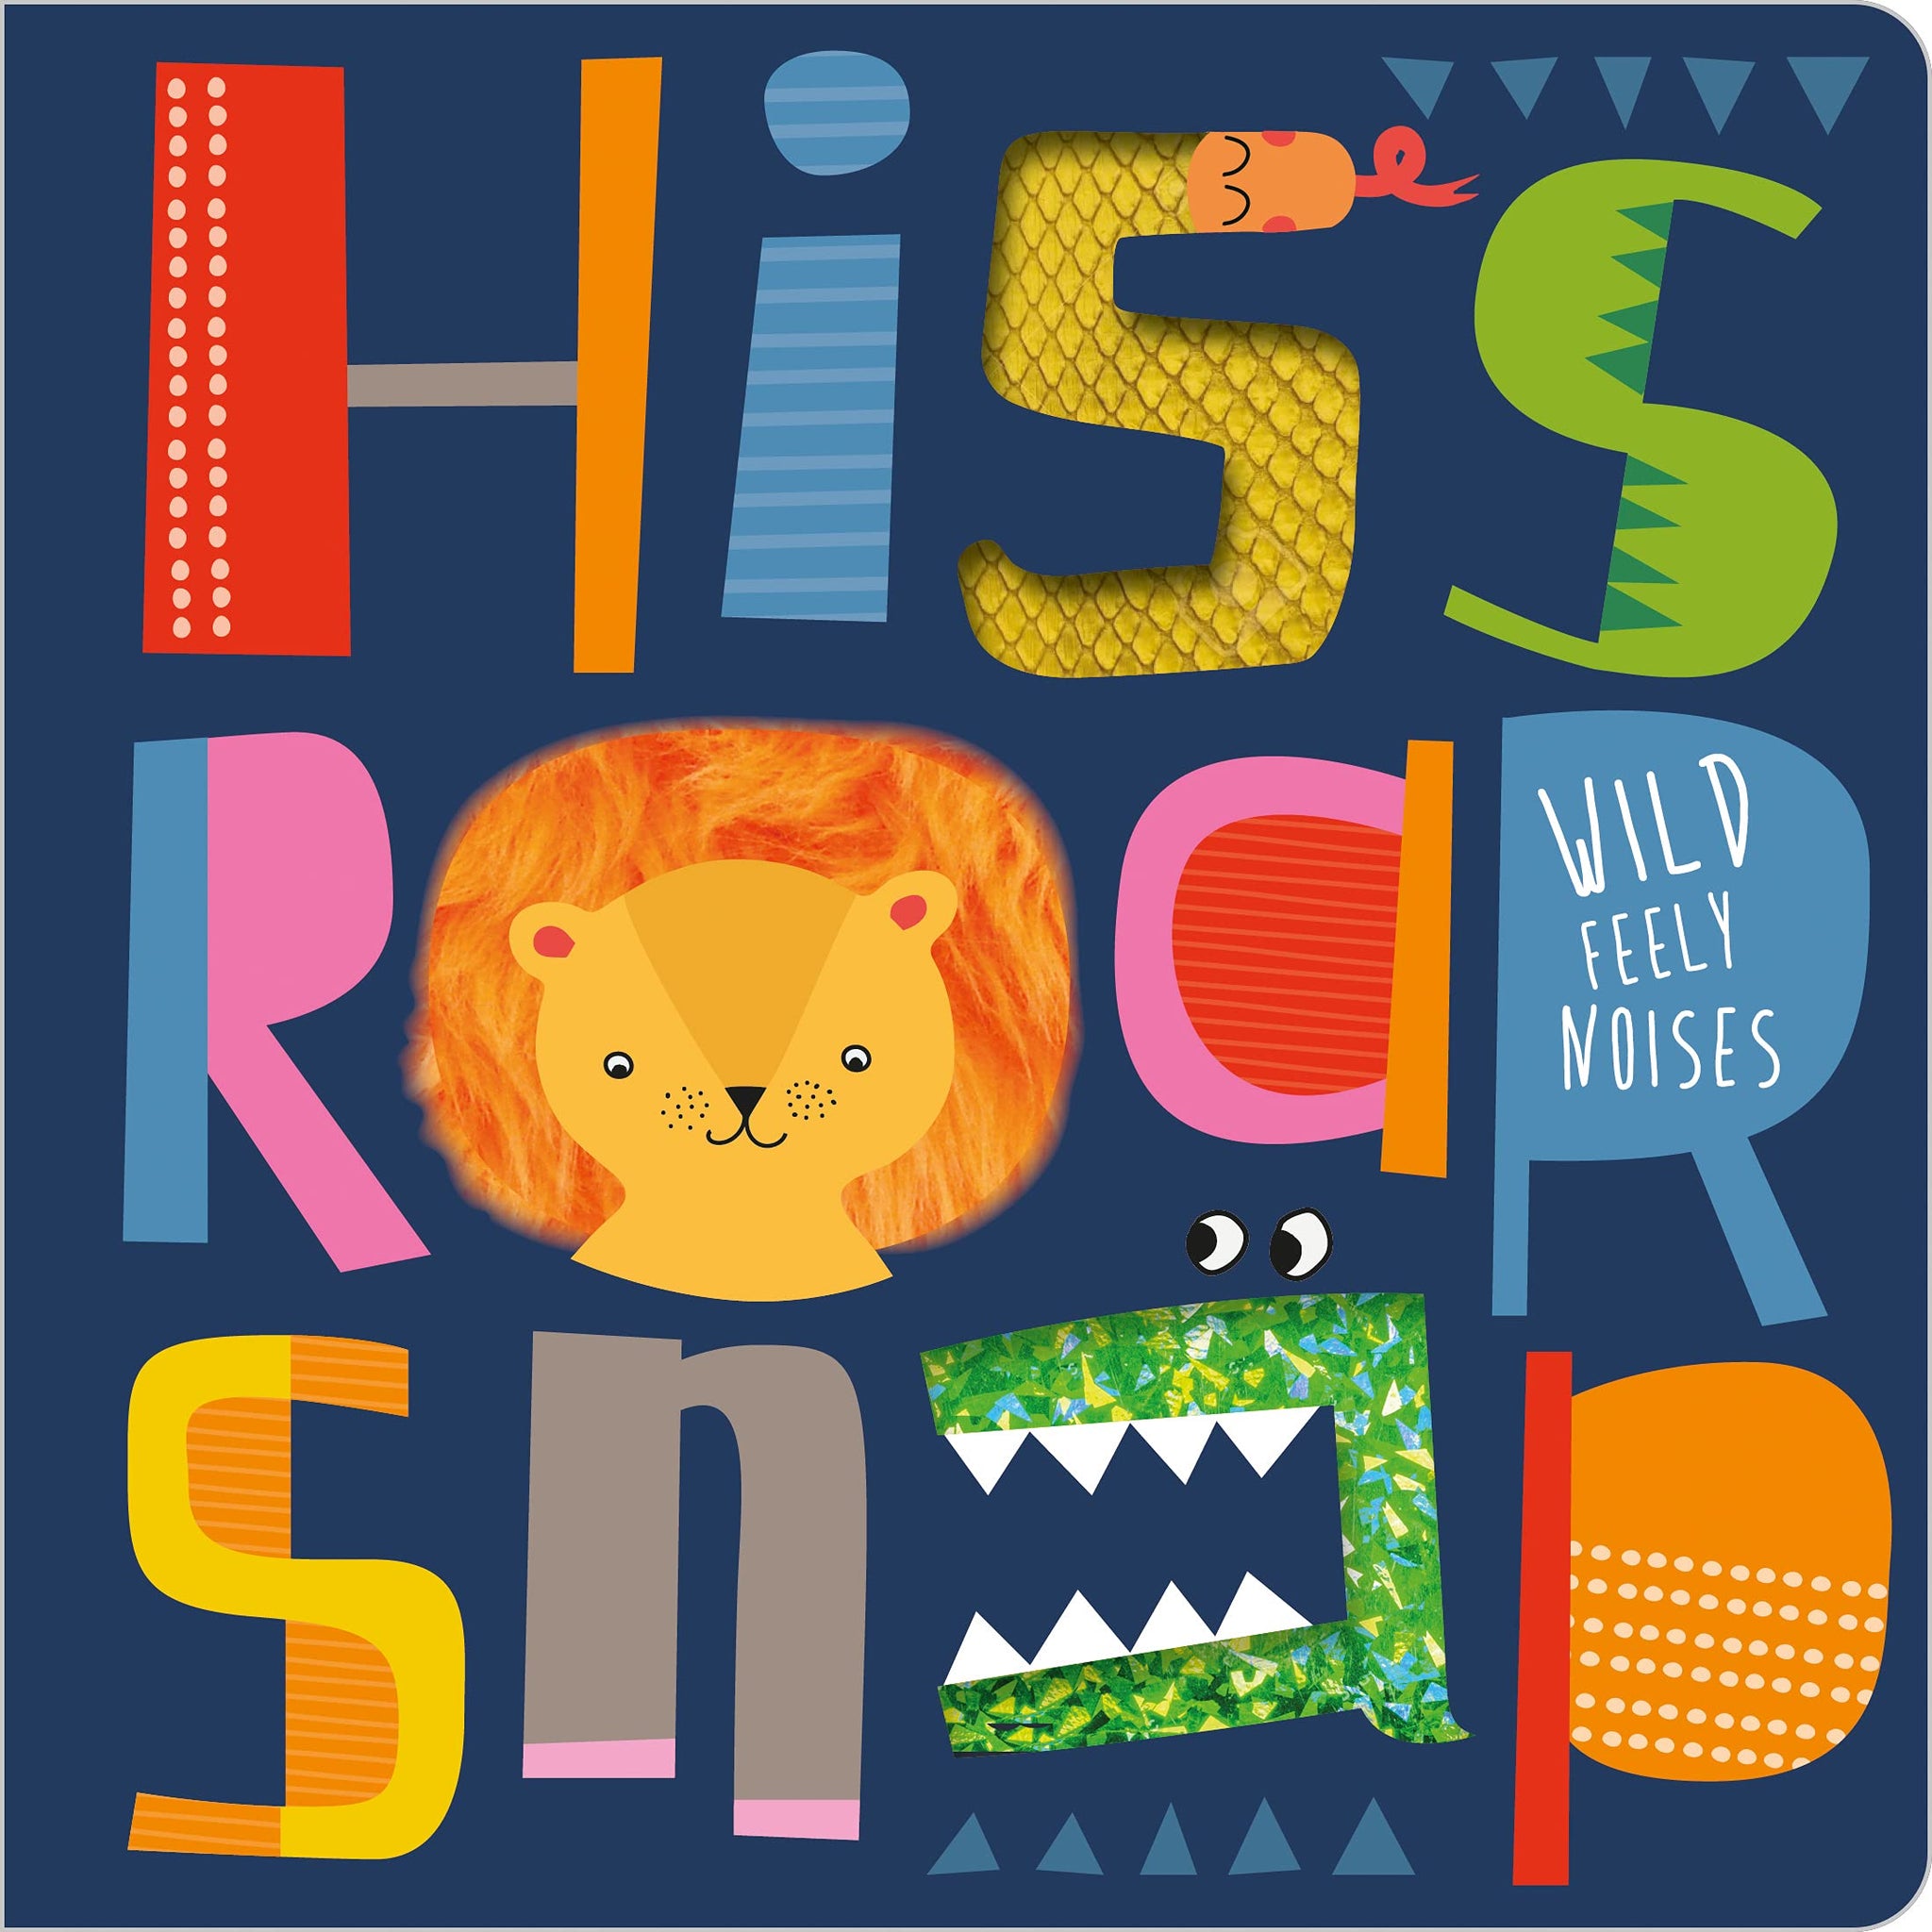 Hiss Roar Snap (Touch And Feel)